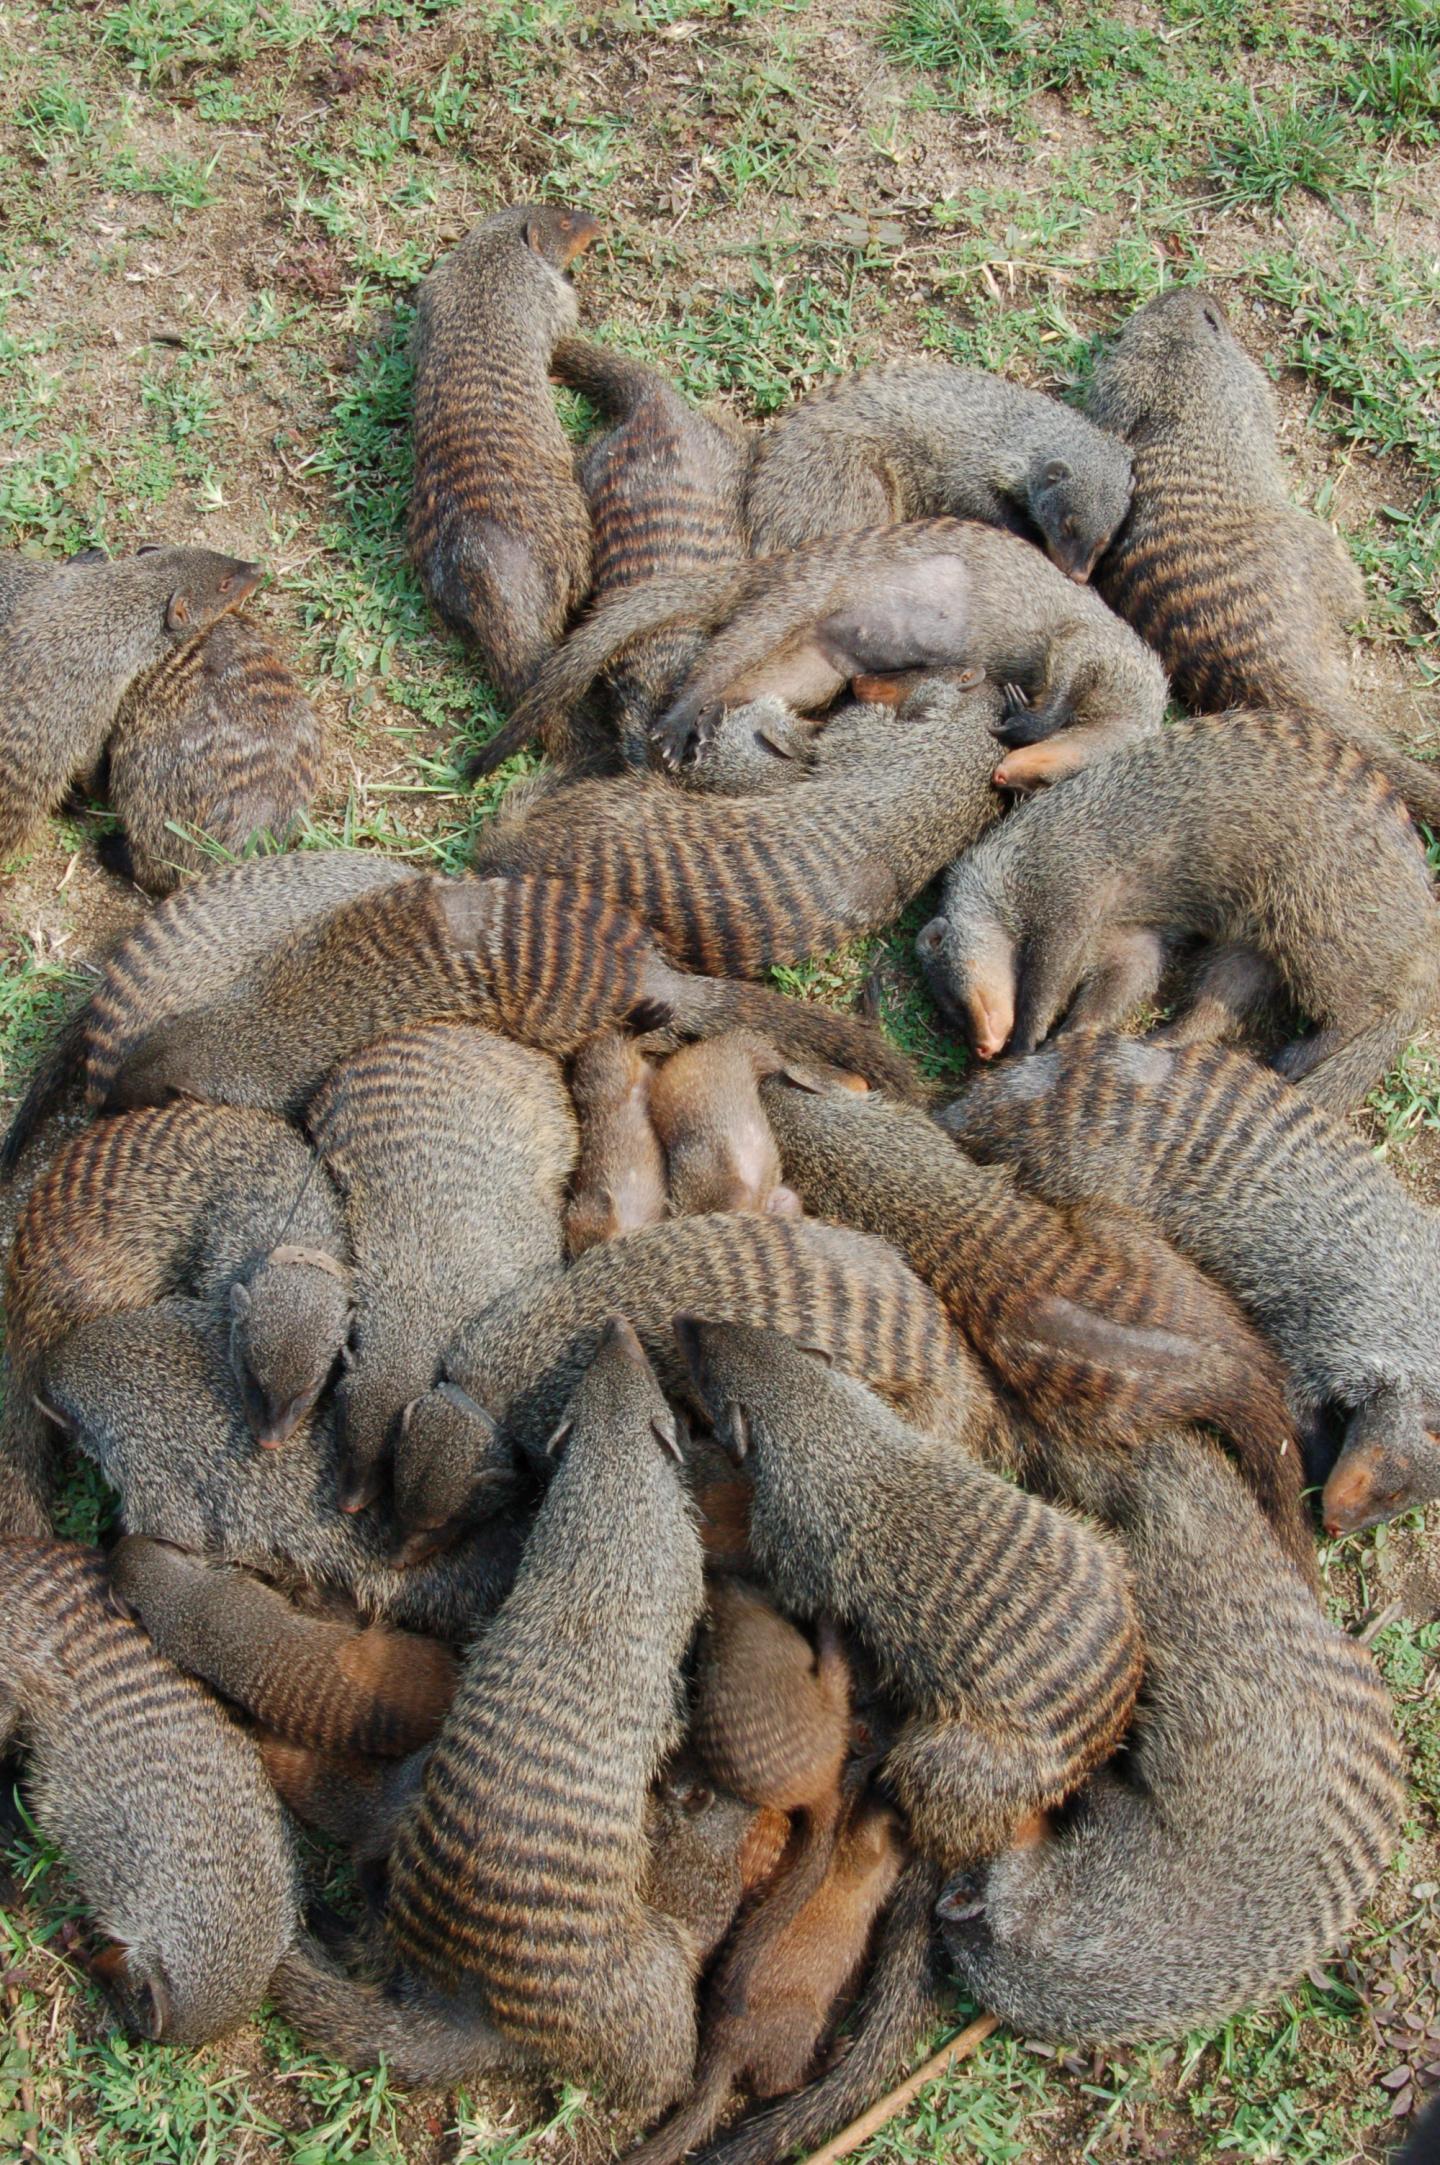 Pile of Mongooses